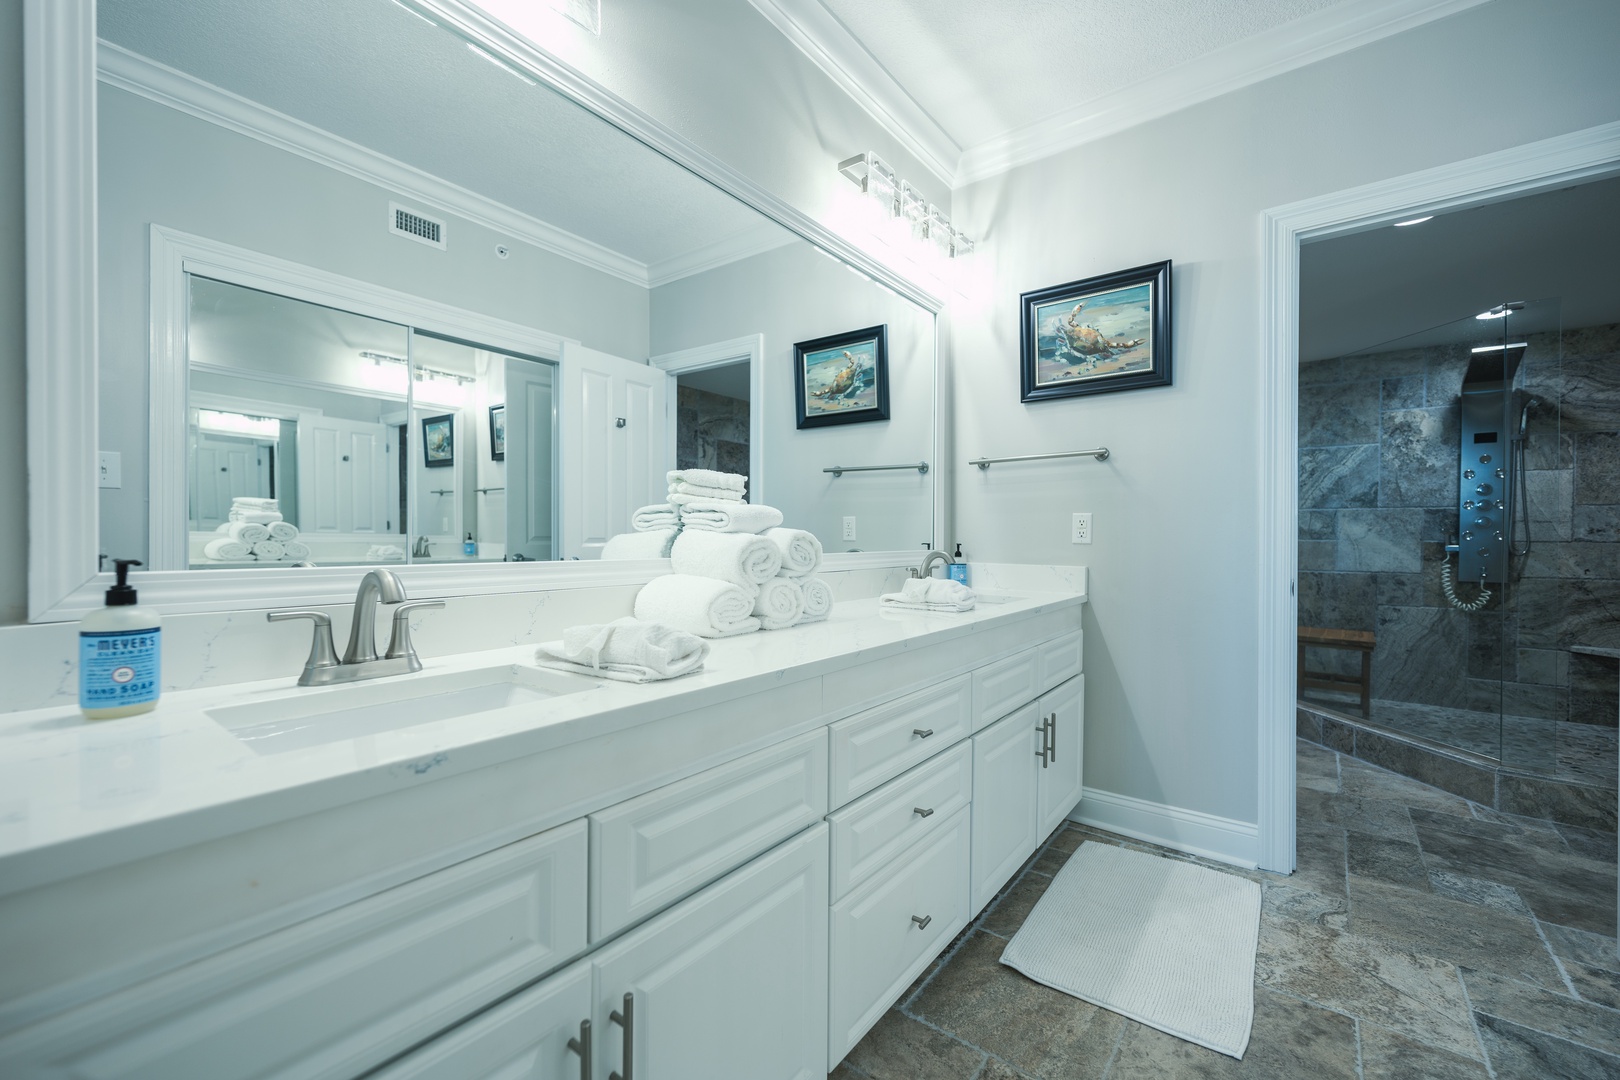 The king ensuite offers dual vanities & a luxurious glass shower